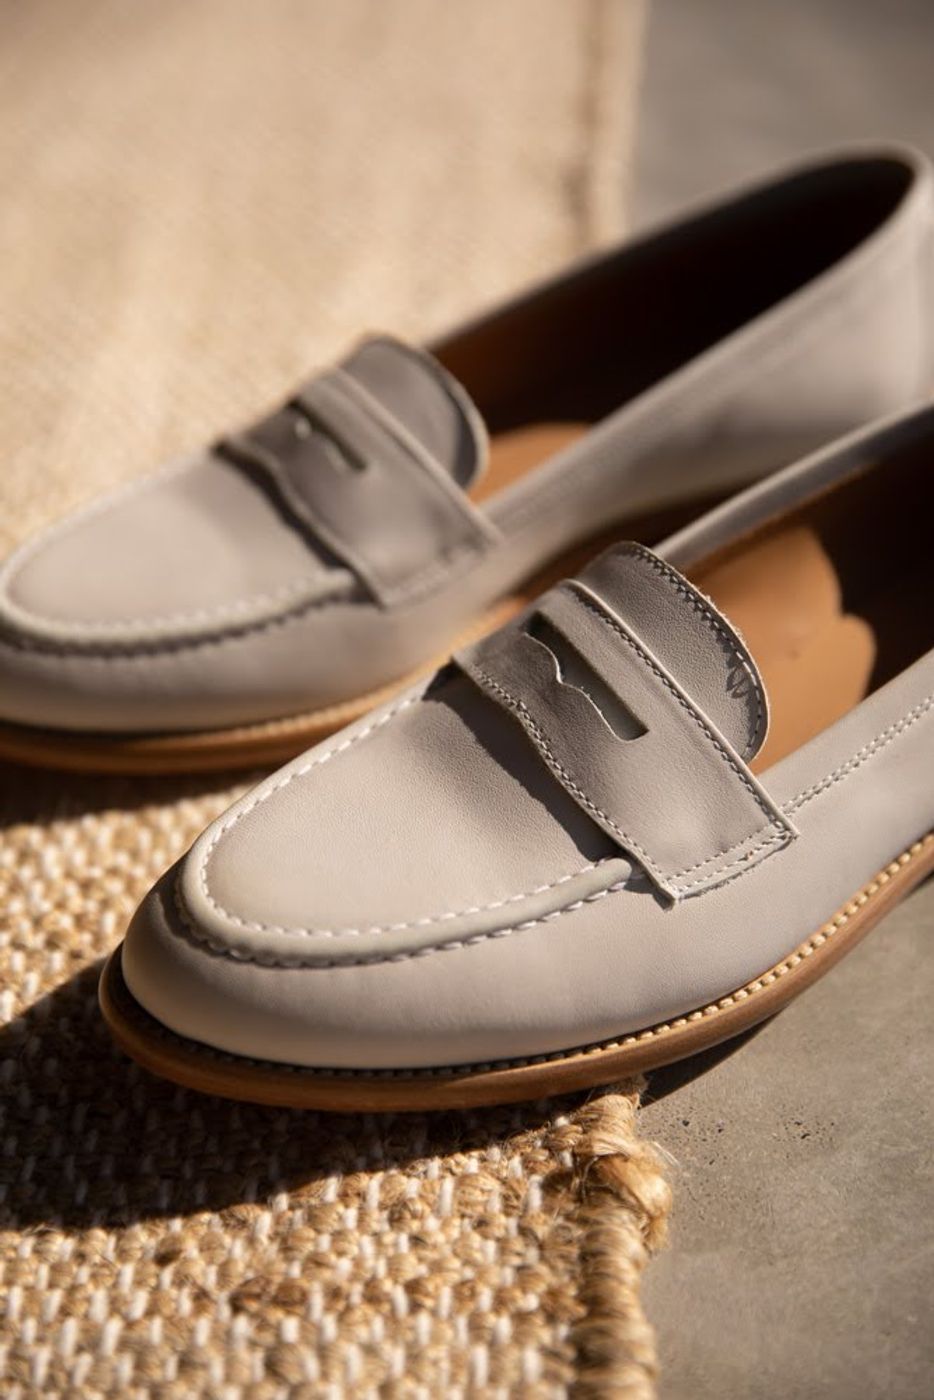 The Best Women's Business Casual Shoes for the Office